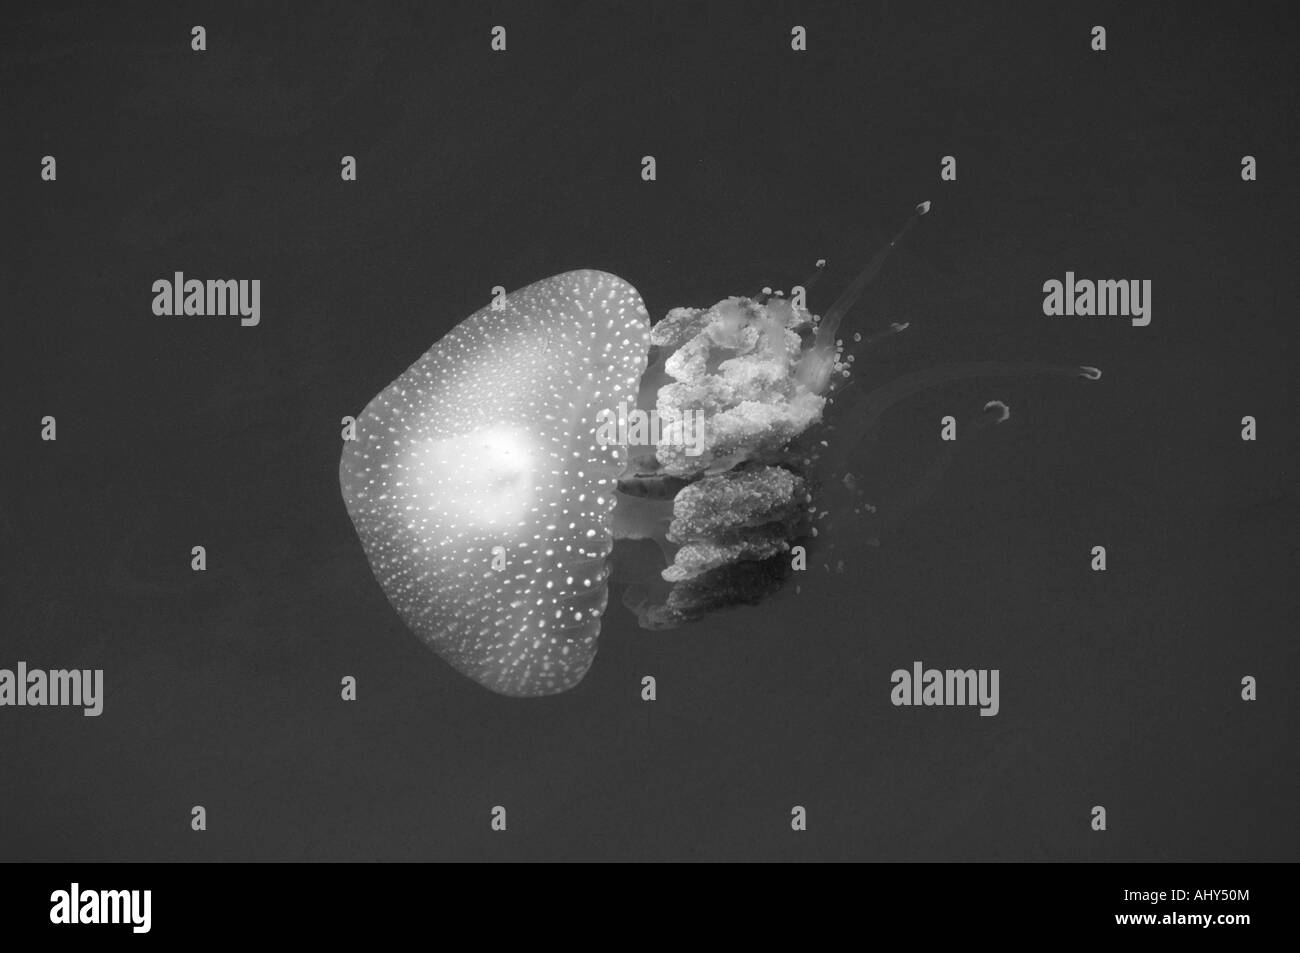 White-spotted Jellyfish Stock Photo